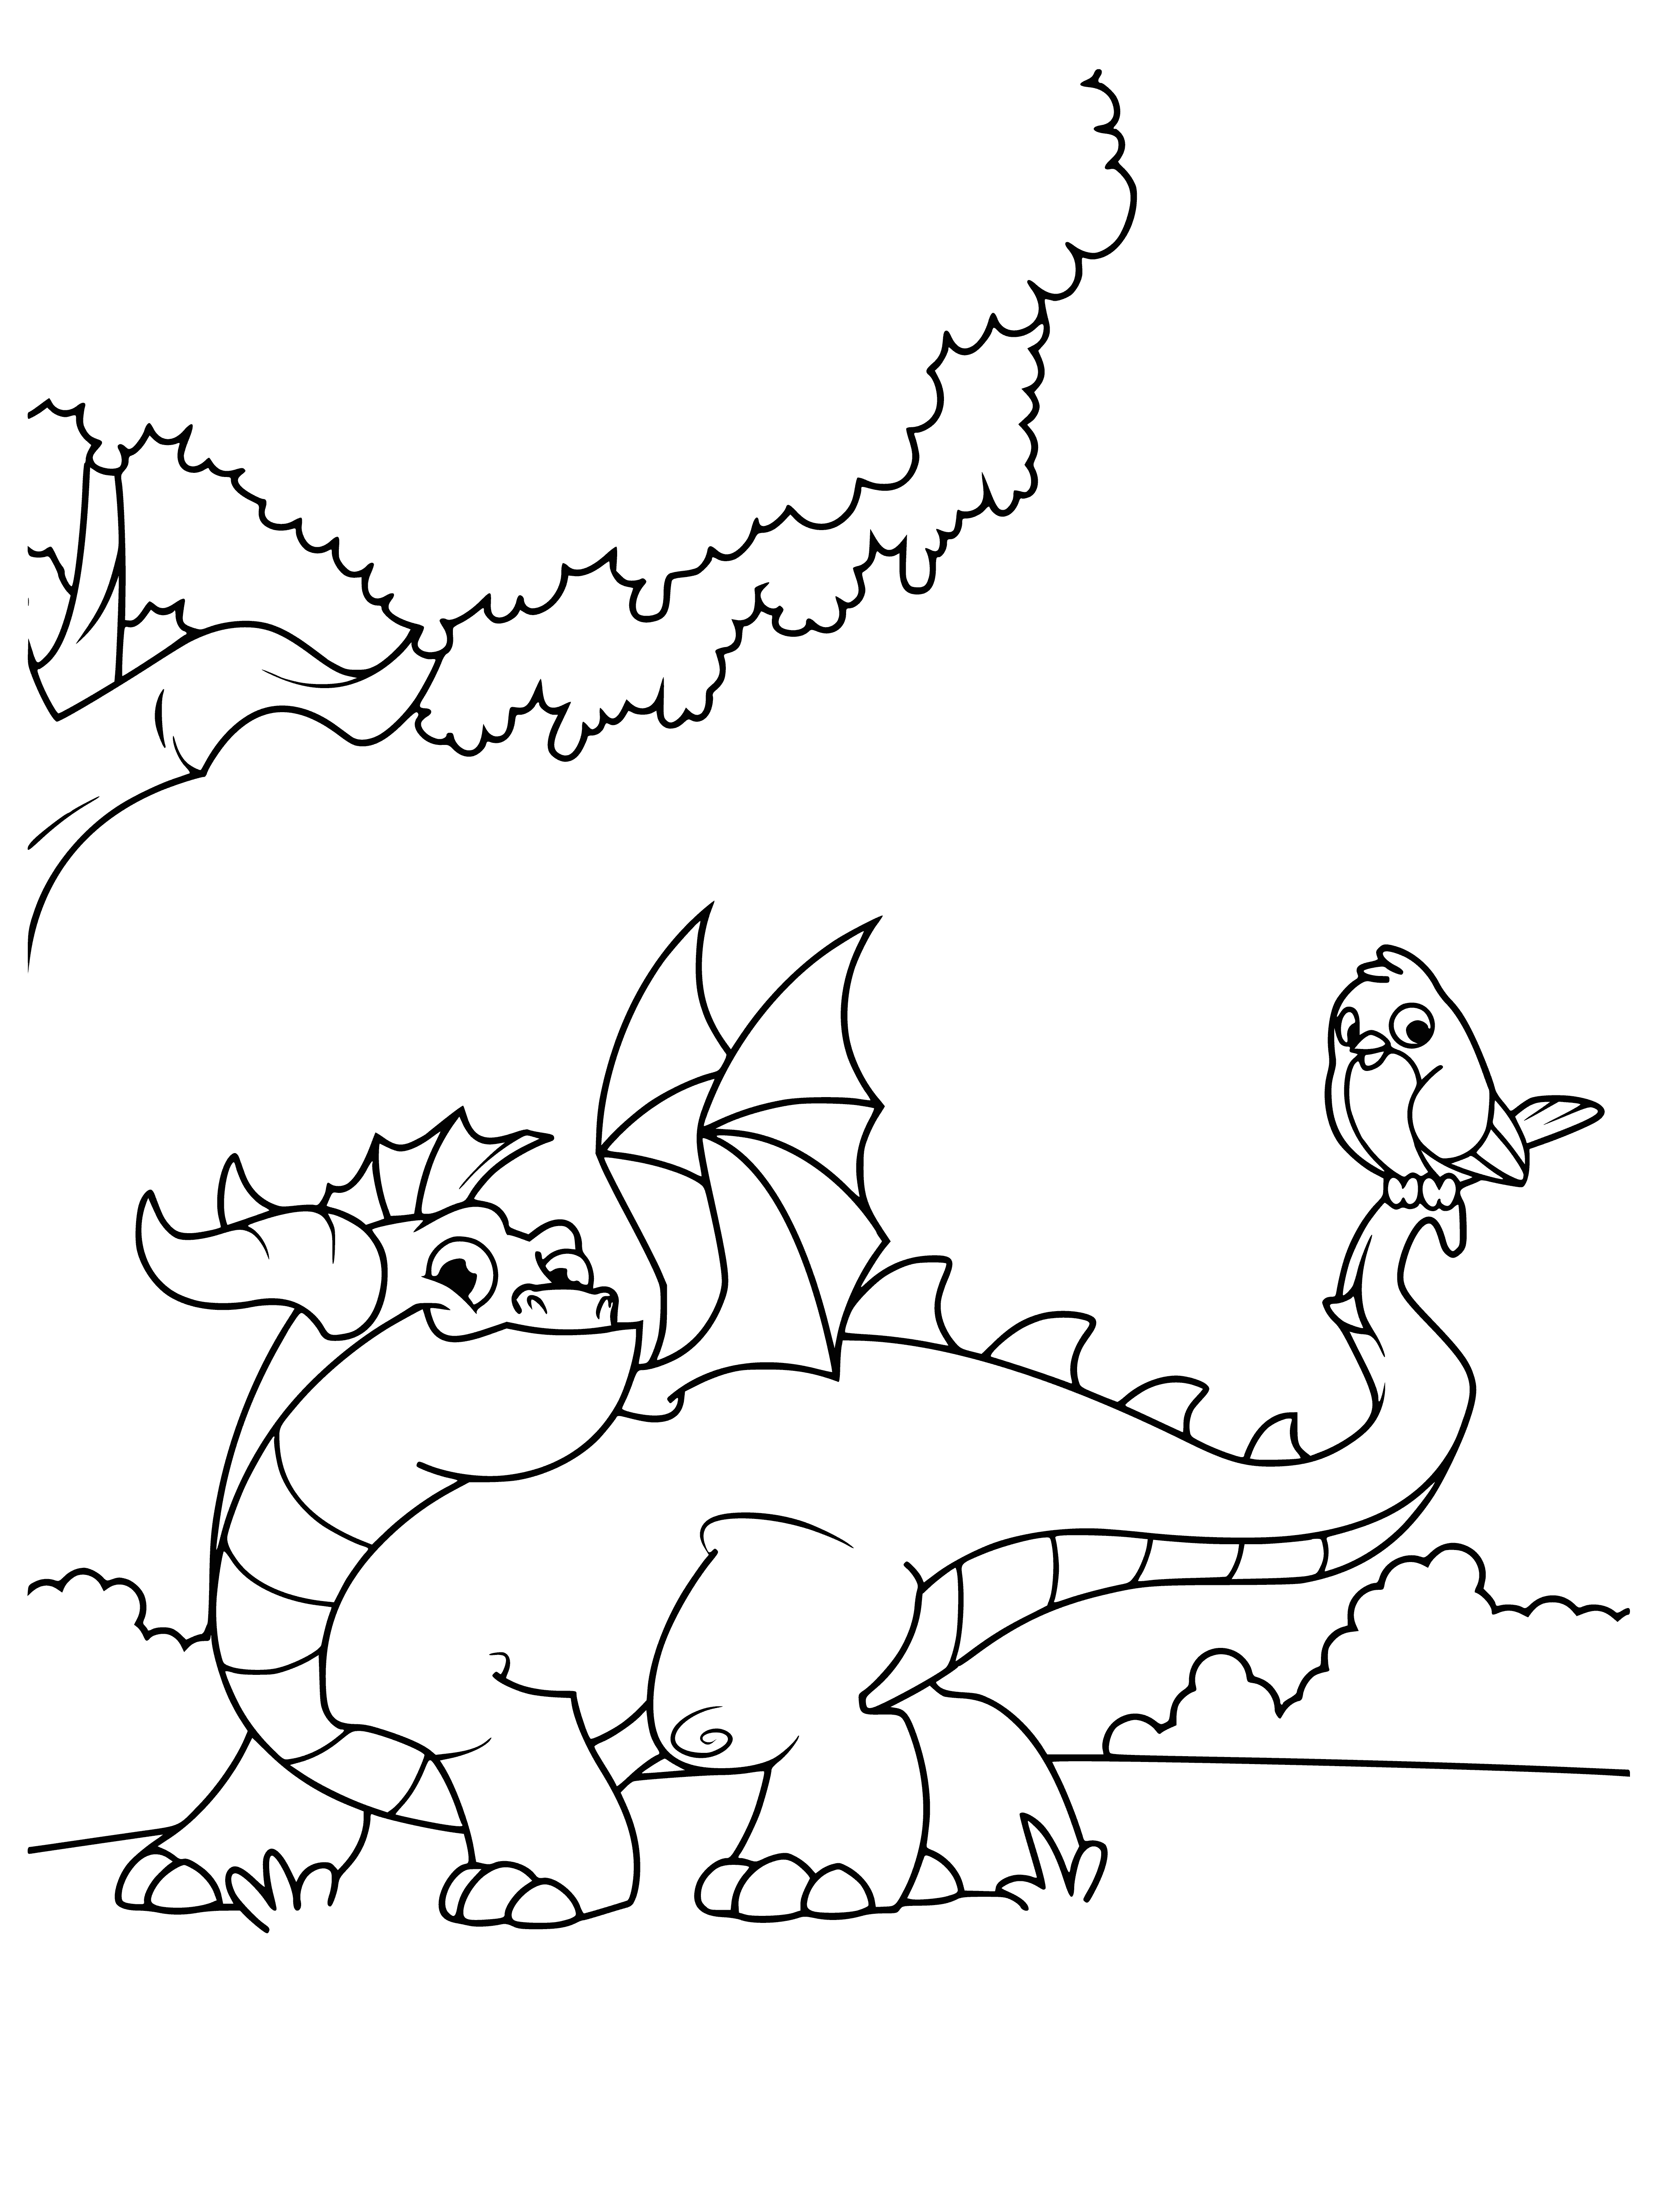 Dragon on a walk coloring page